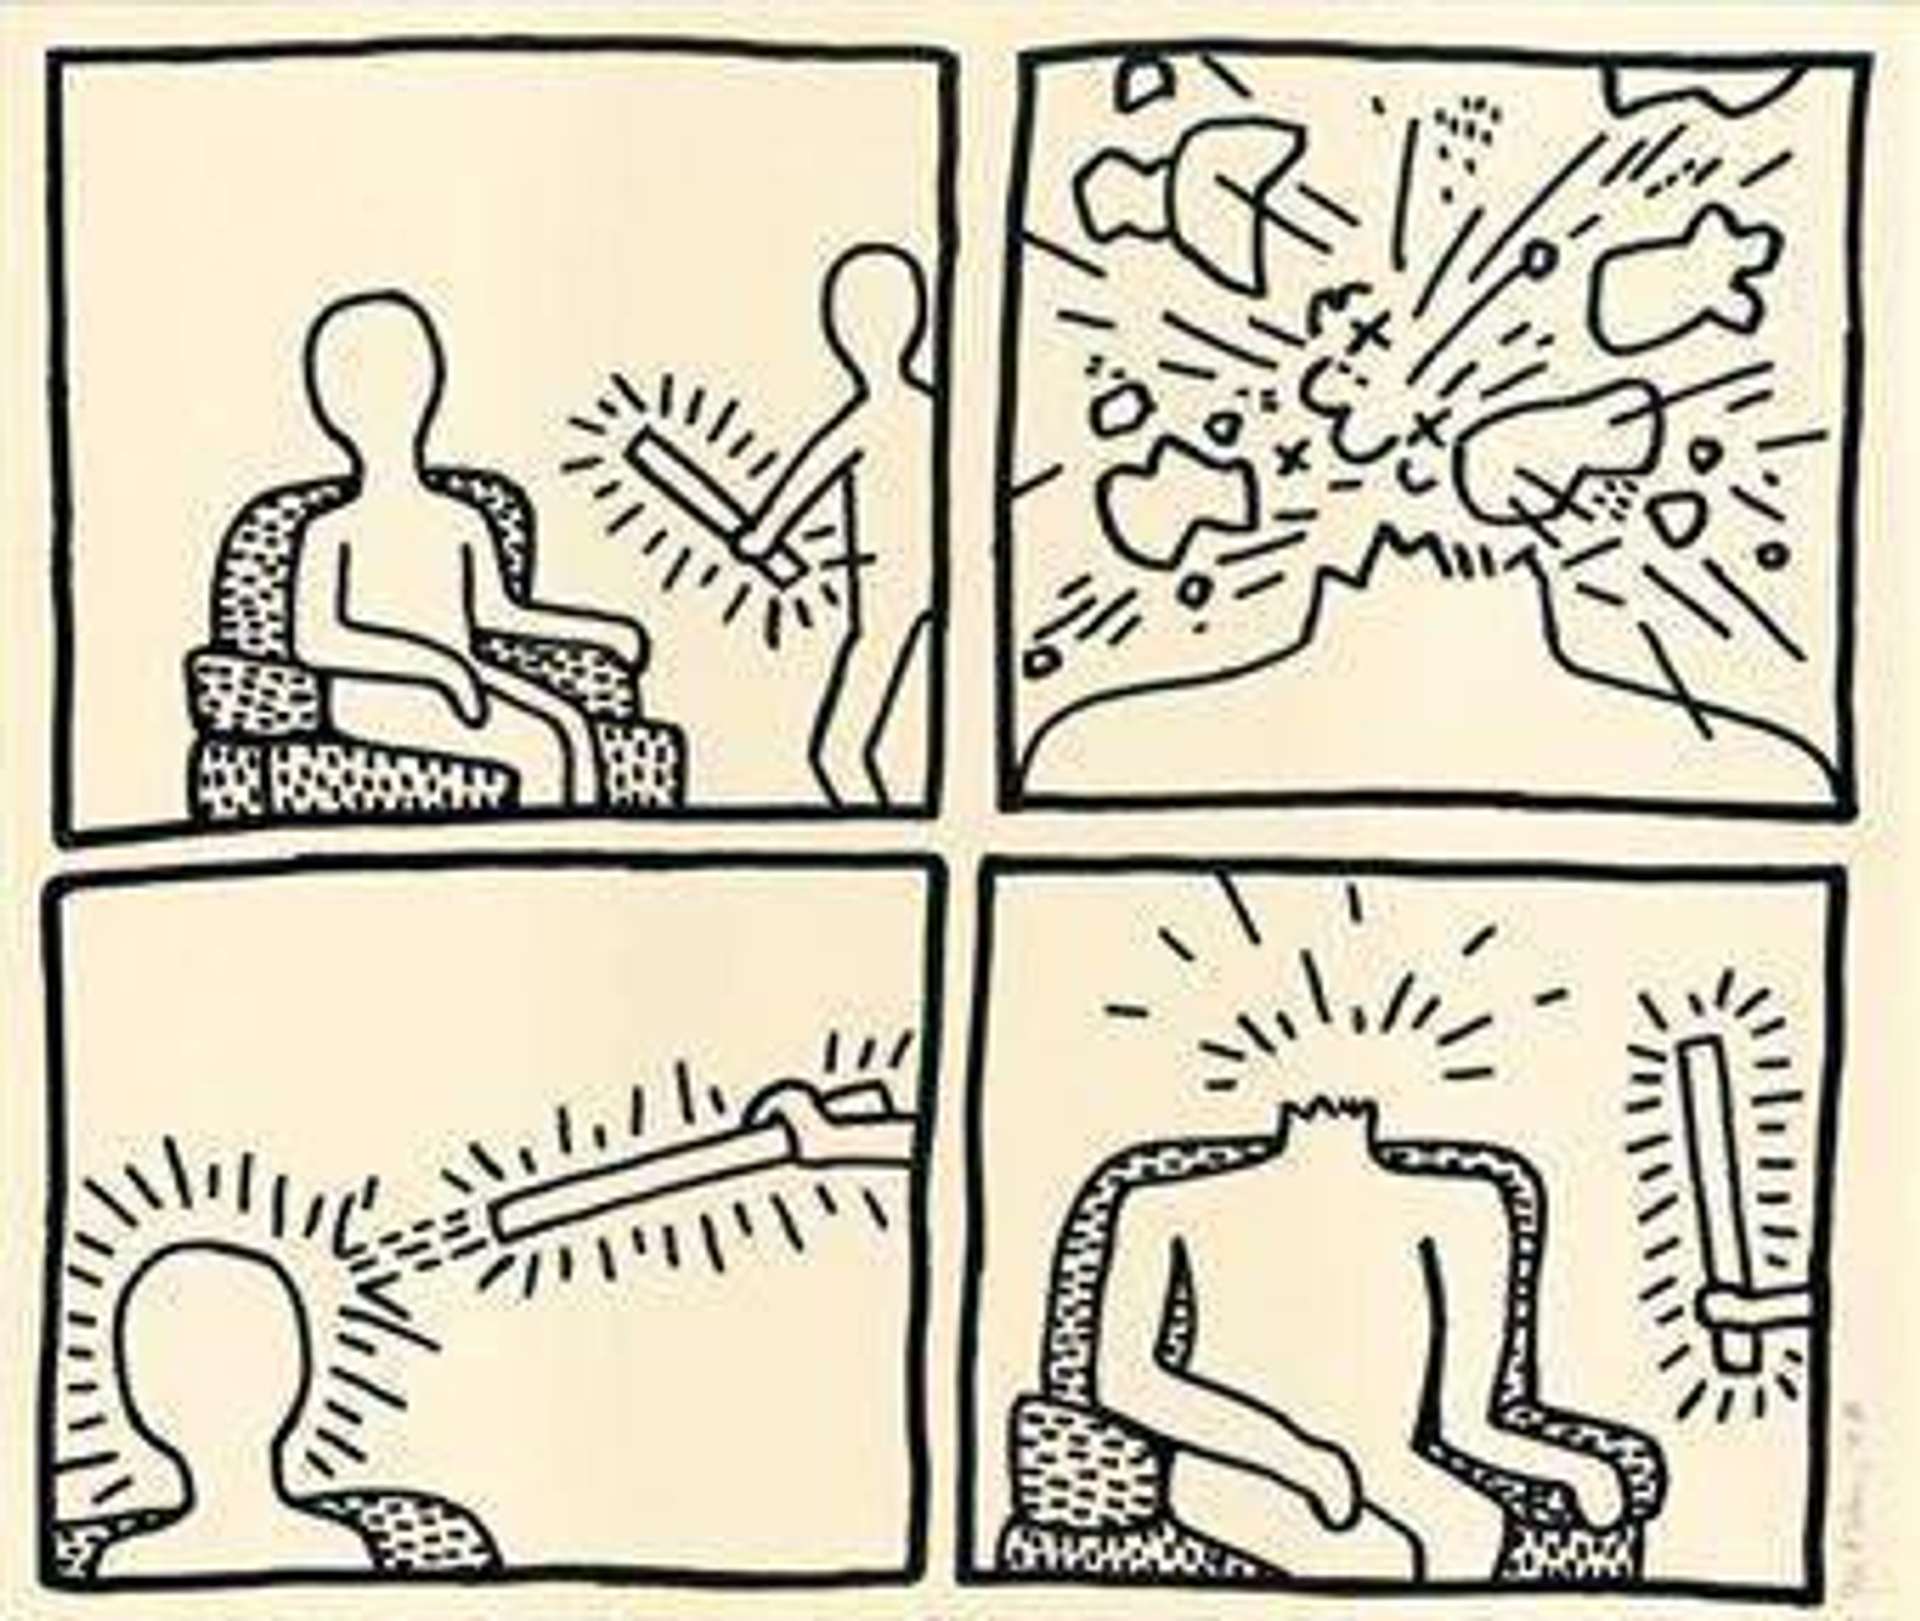 Keith Haring’s The Blueprint Drawings 14. A Pop Art screenprint of a black and white comic strip of various scenes including a figure getting its head removed.